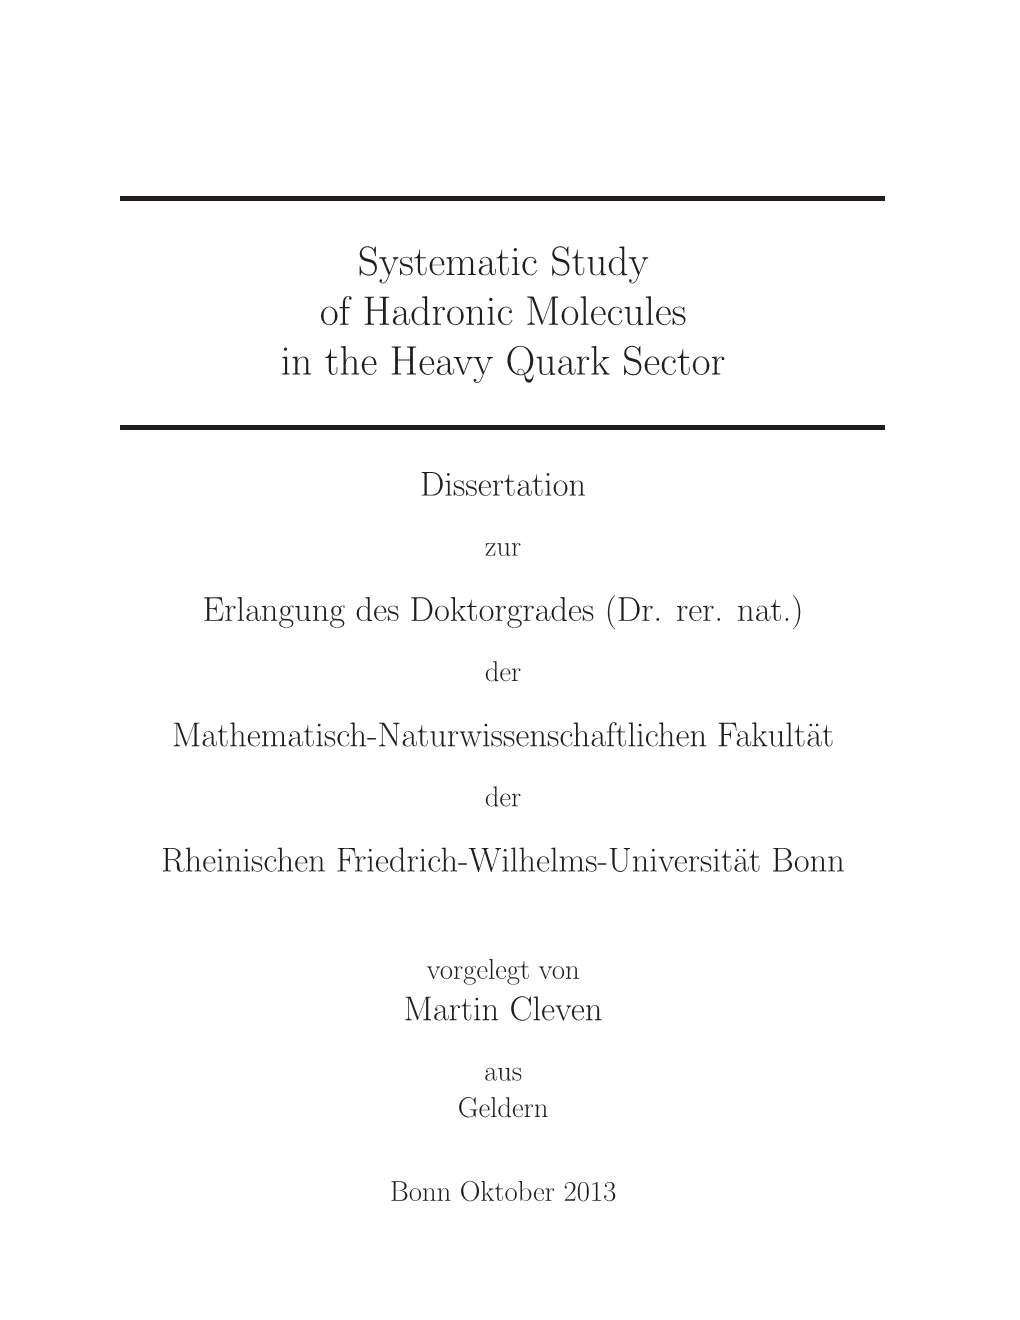 Systematic Study of Hadronic Molecules in the Heavy Quark Sector